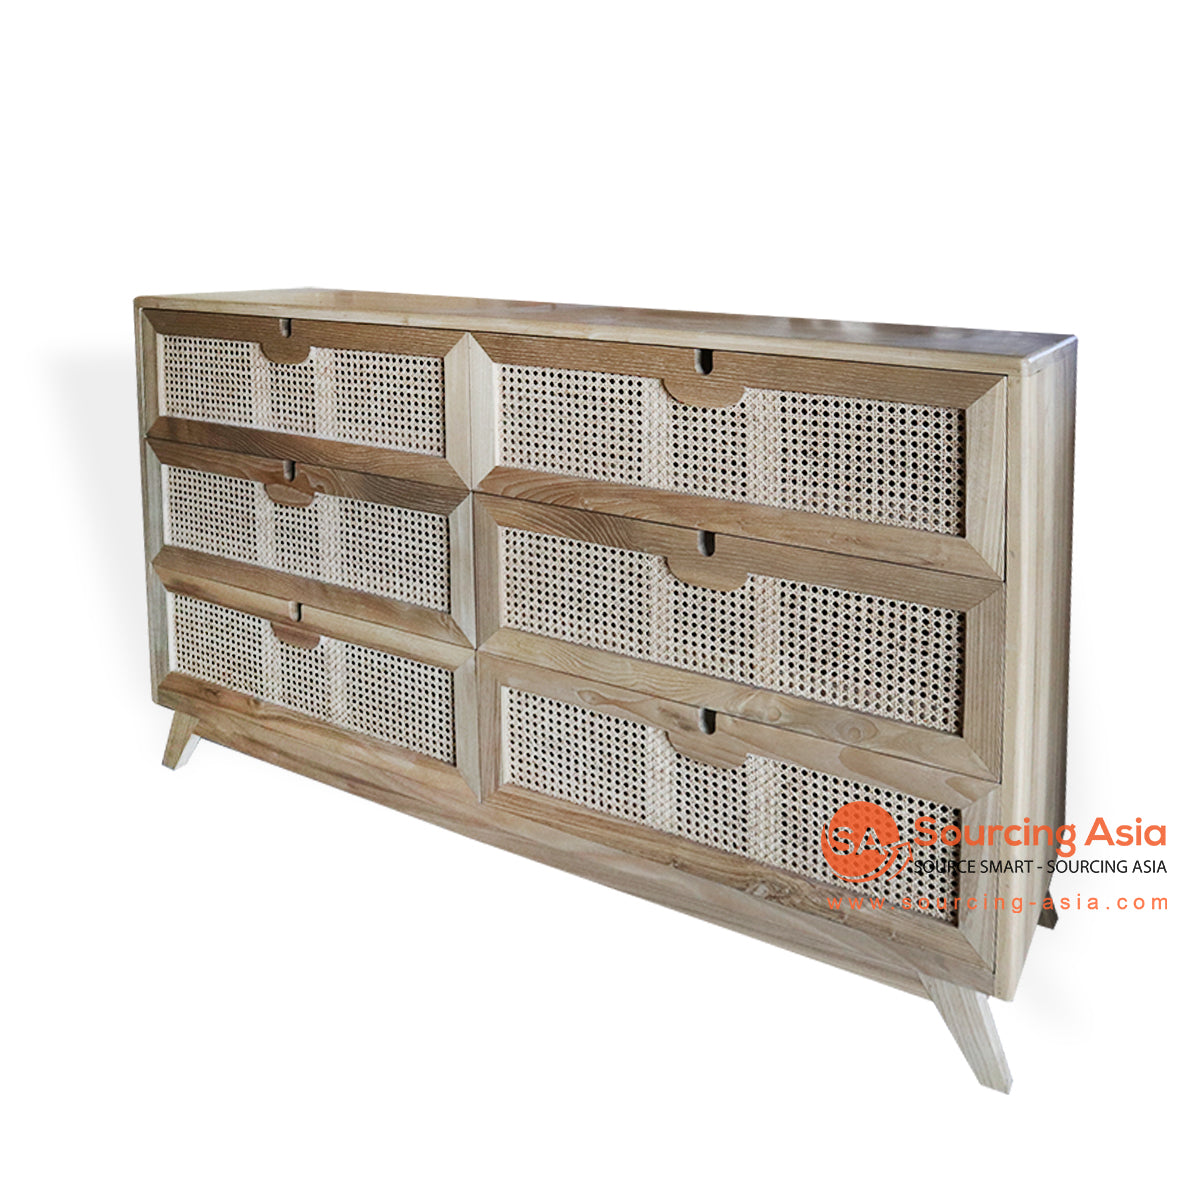 BNTC020-4 NATURAL RECYCLED TEAK WOOD AND RATTAN SIX DRAWERS BUFFET